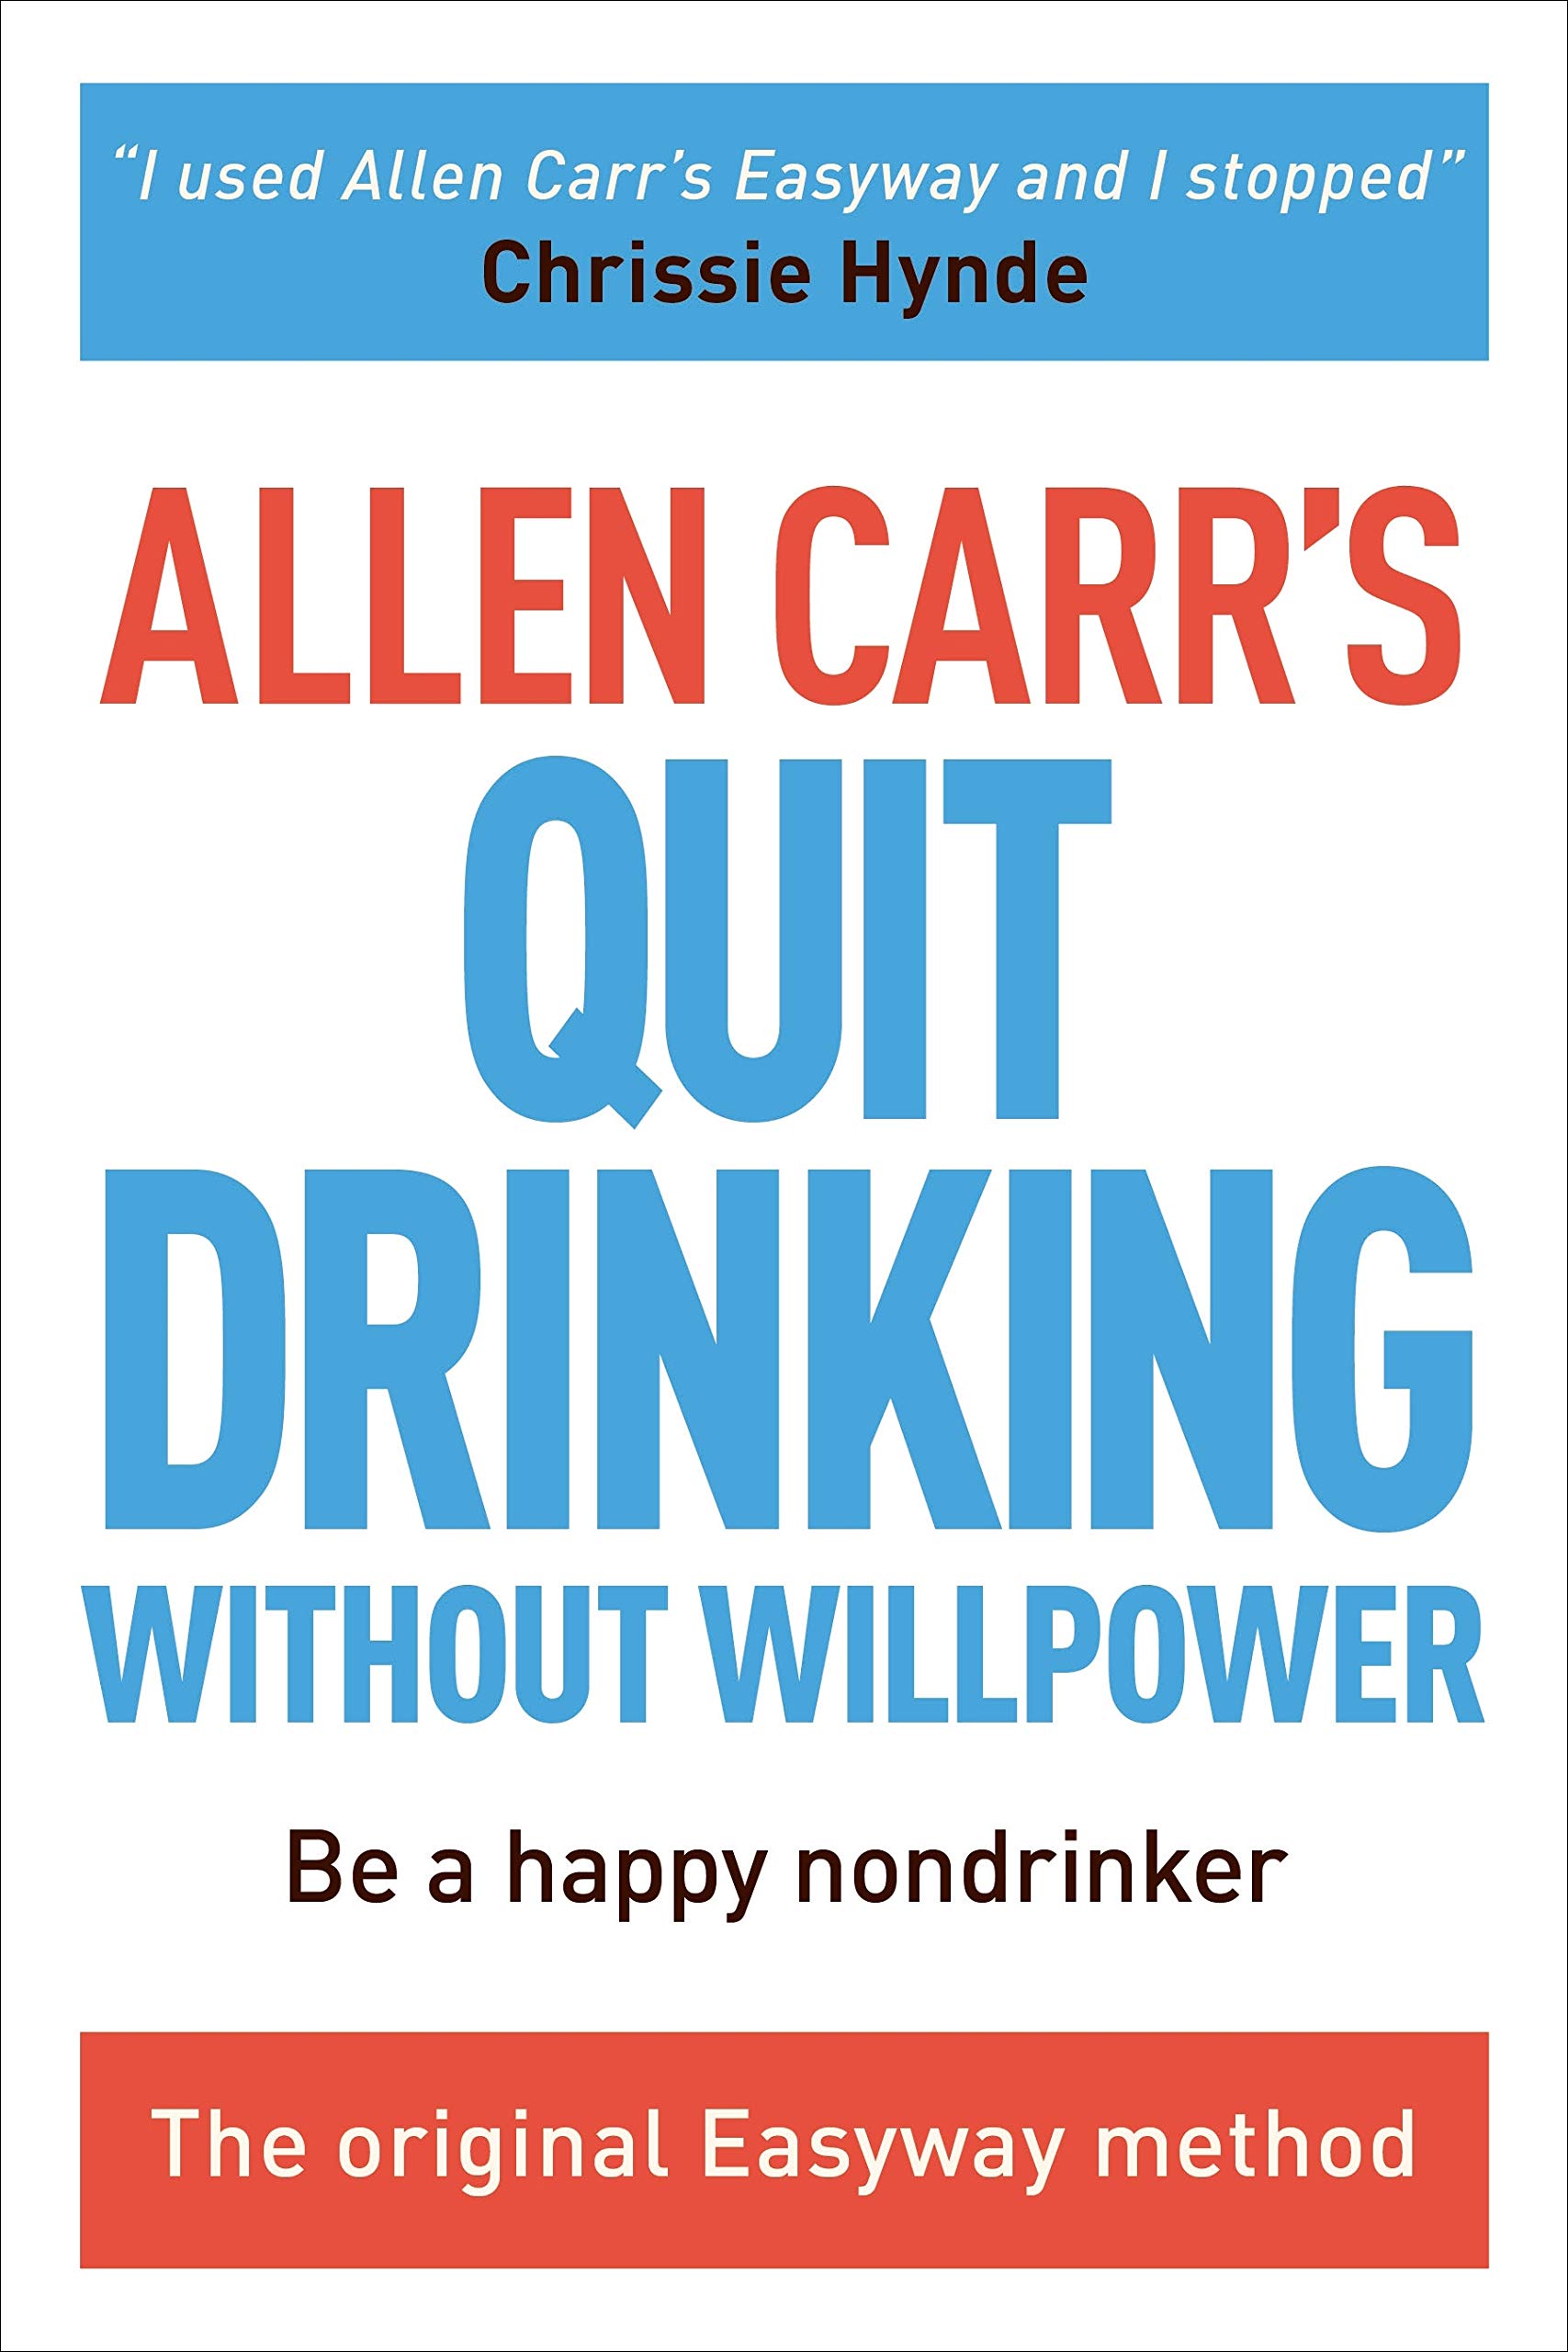 The Easy Way to Stop Drinking, by Allen Carr